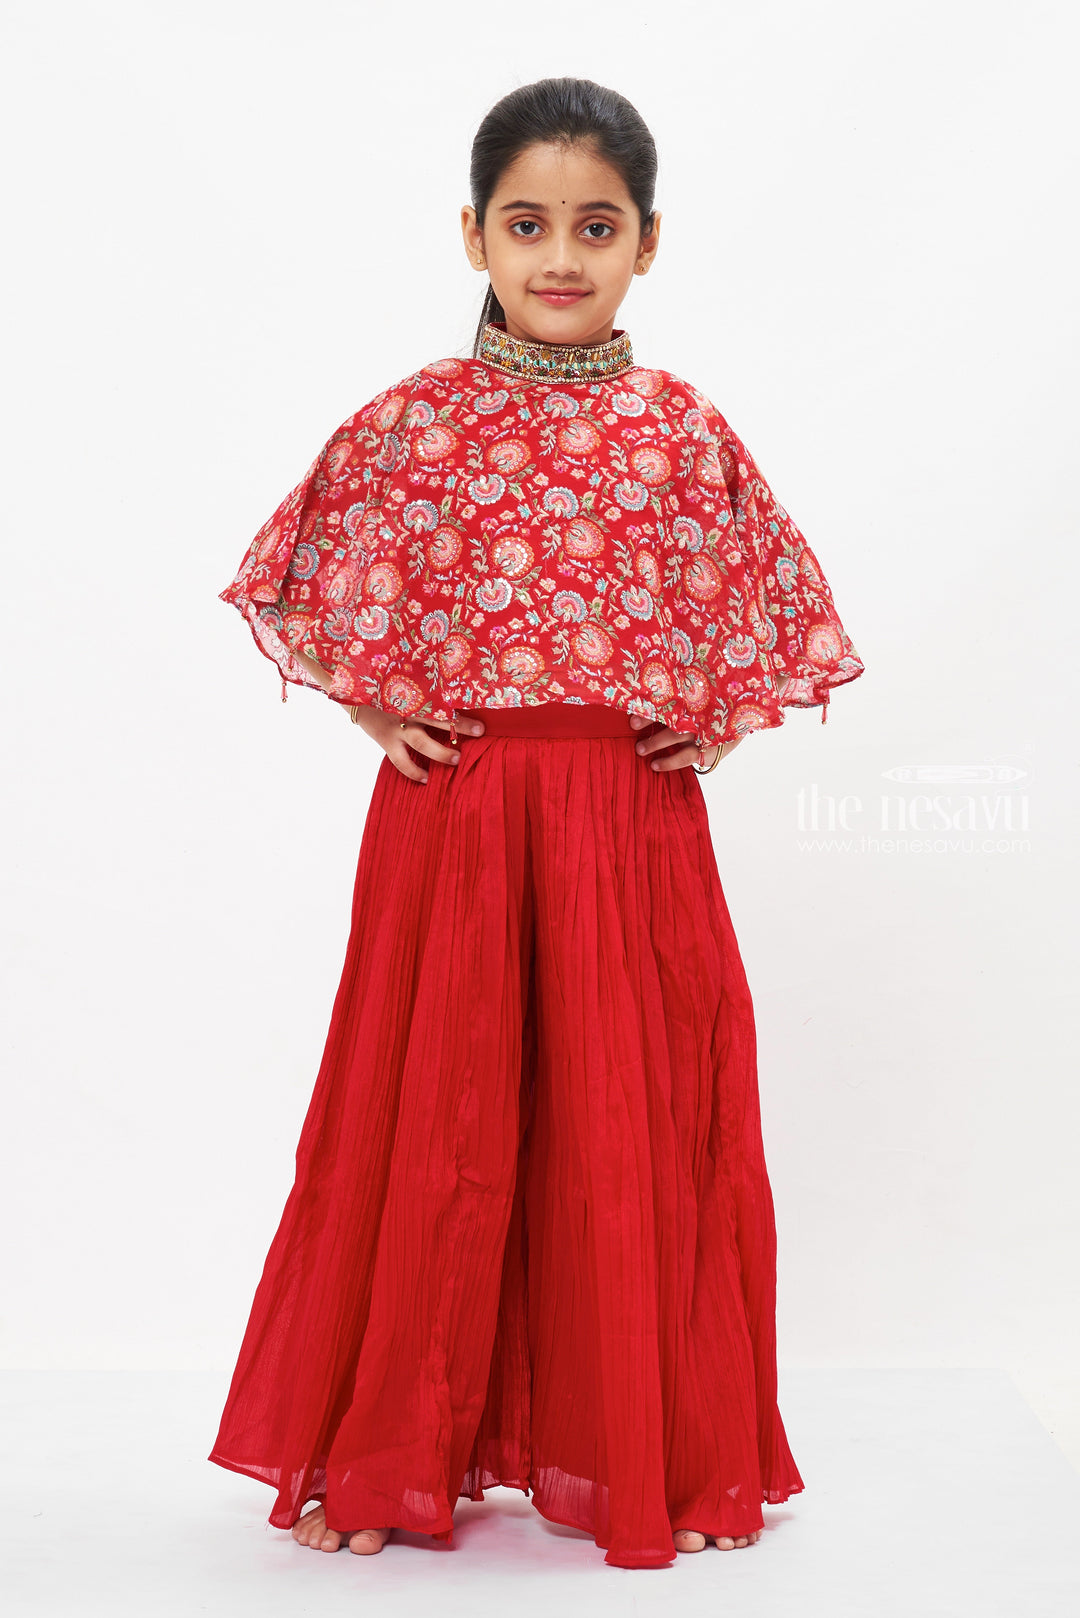 The Nesavu Girls Sharara / Plazo Set Radiant Red Designer Top with Palazzo Pants Set for Girls - A Festive Fusion Nesavu 22 (4Y) / Red / Georgette GPS287A-22 Girls Festive Red Designer Top and Palazzo Set | Celebrate in Style | The Nesavu